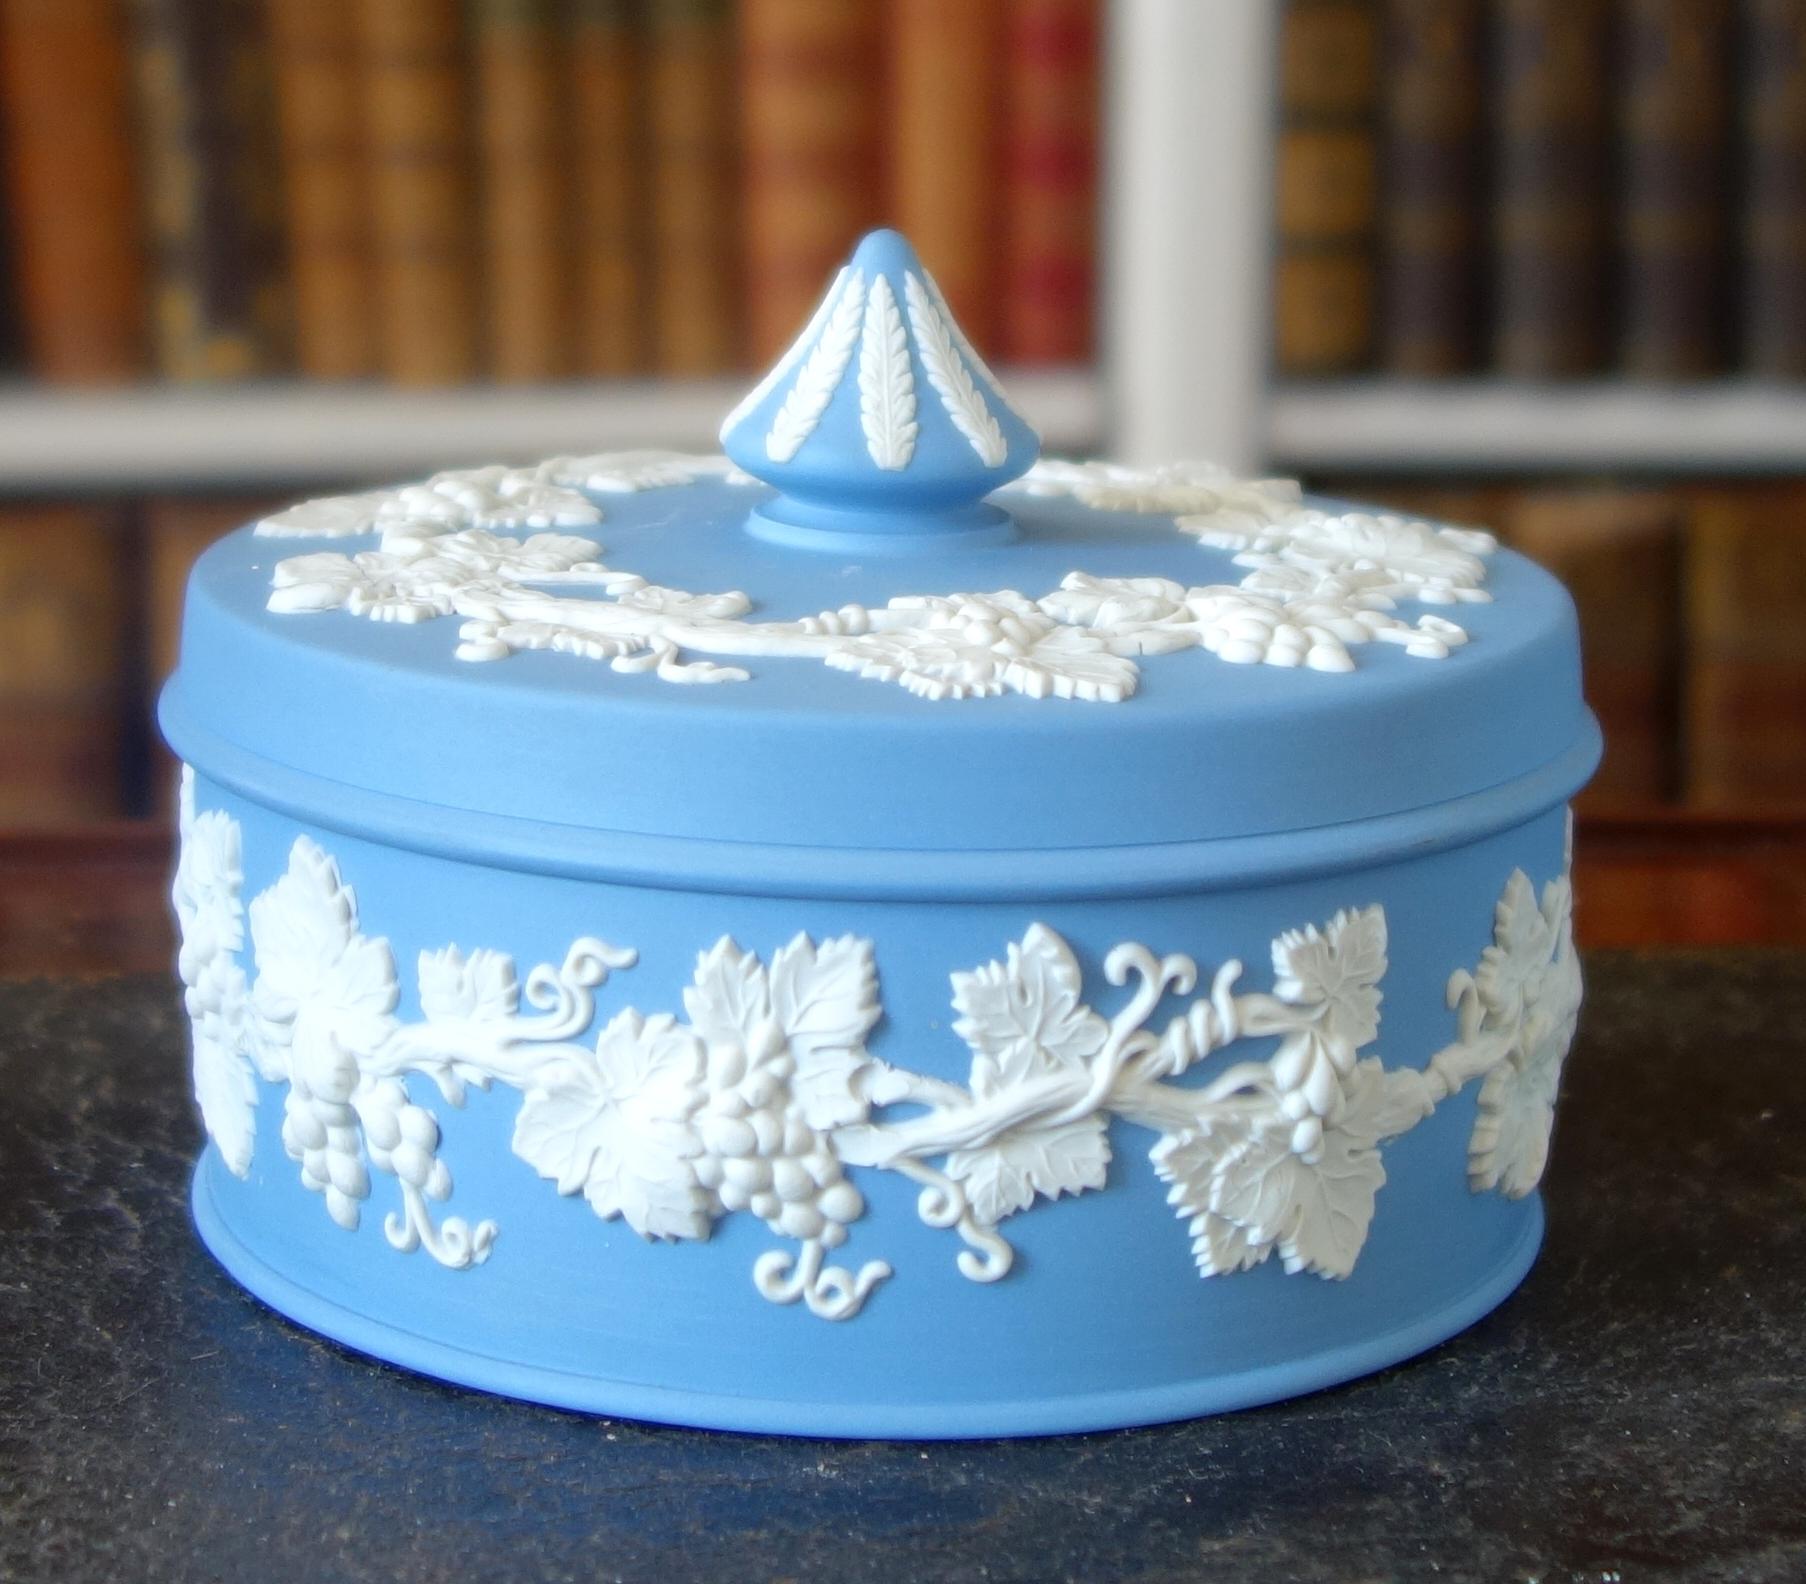 Large Wedgwood jasperware lidded candy box, beautiful neoclassical style item decorated with antique-style white grapes friezes on a sky-blue background.
Second half of 20th century refined and highly decorative item that reminds 18th century